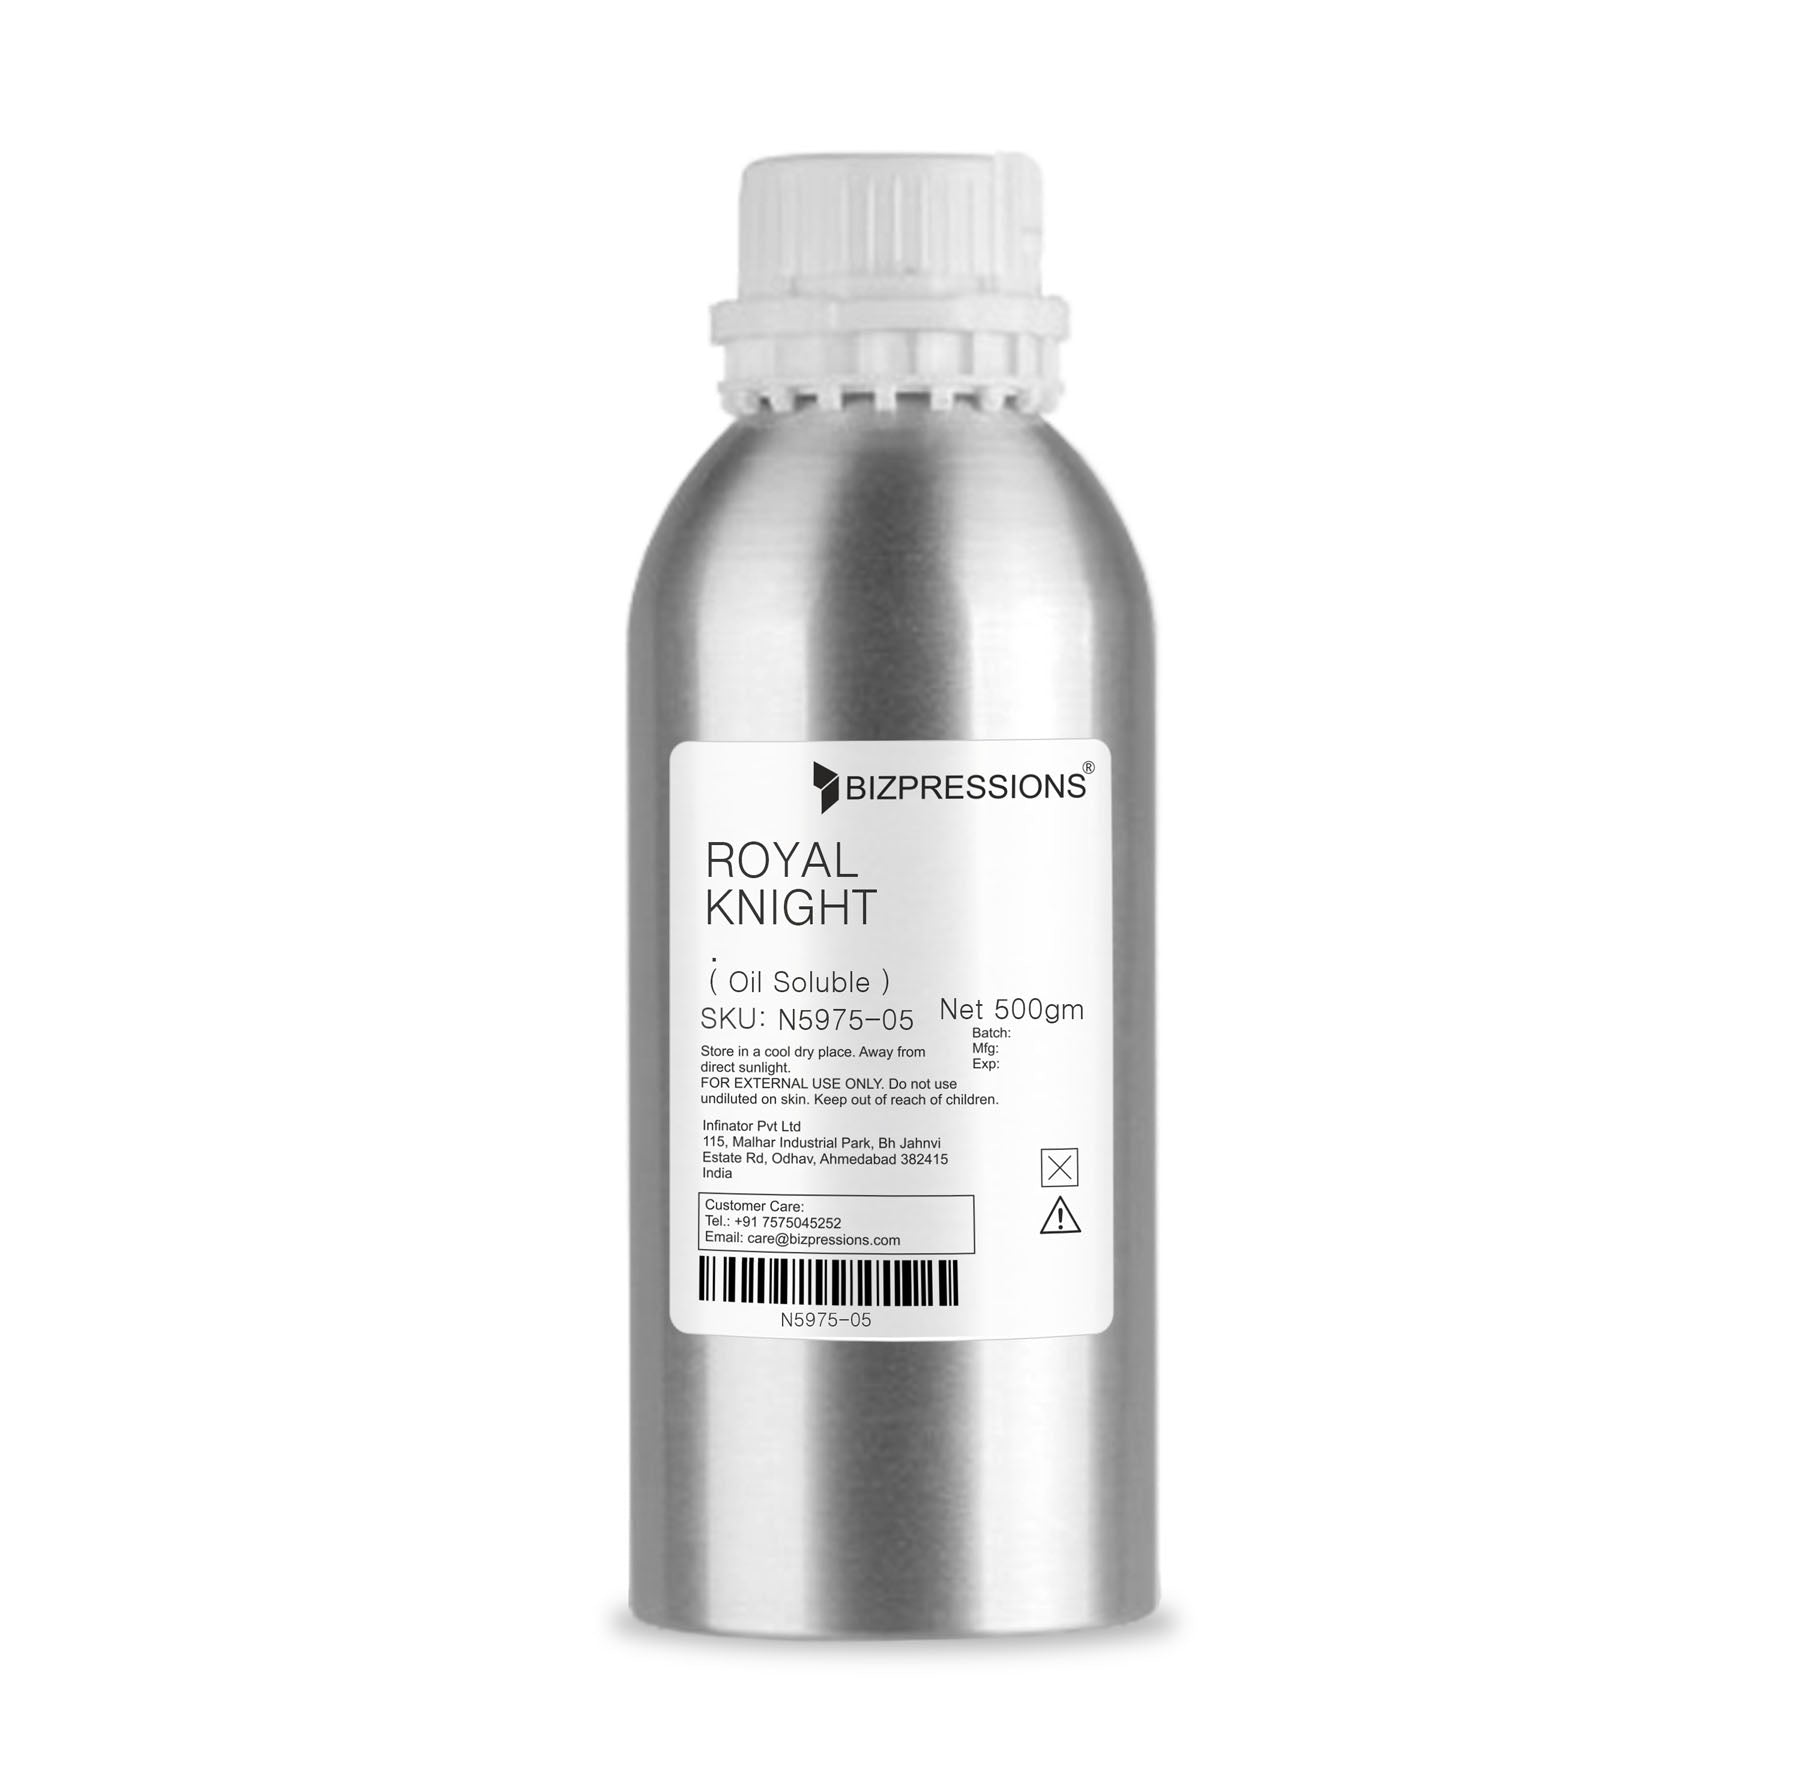 ROYAL KNIGHT - Fragrance ( Oil Soluble ) - 500 gm